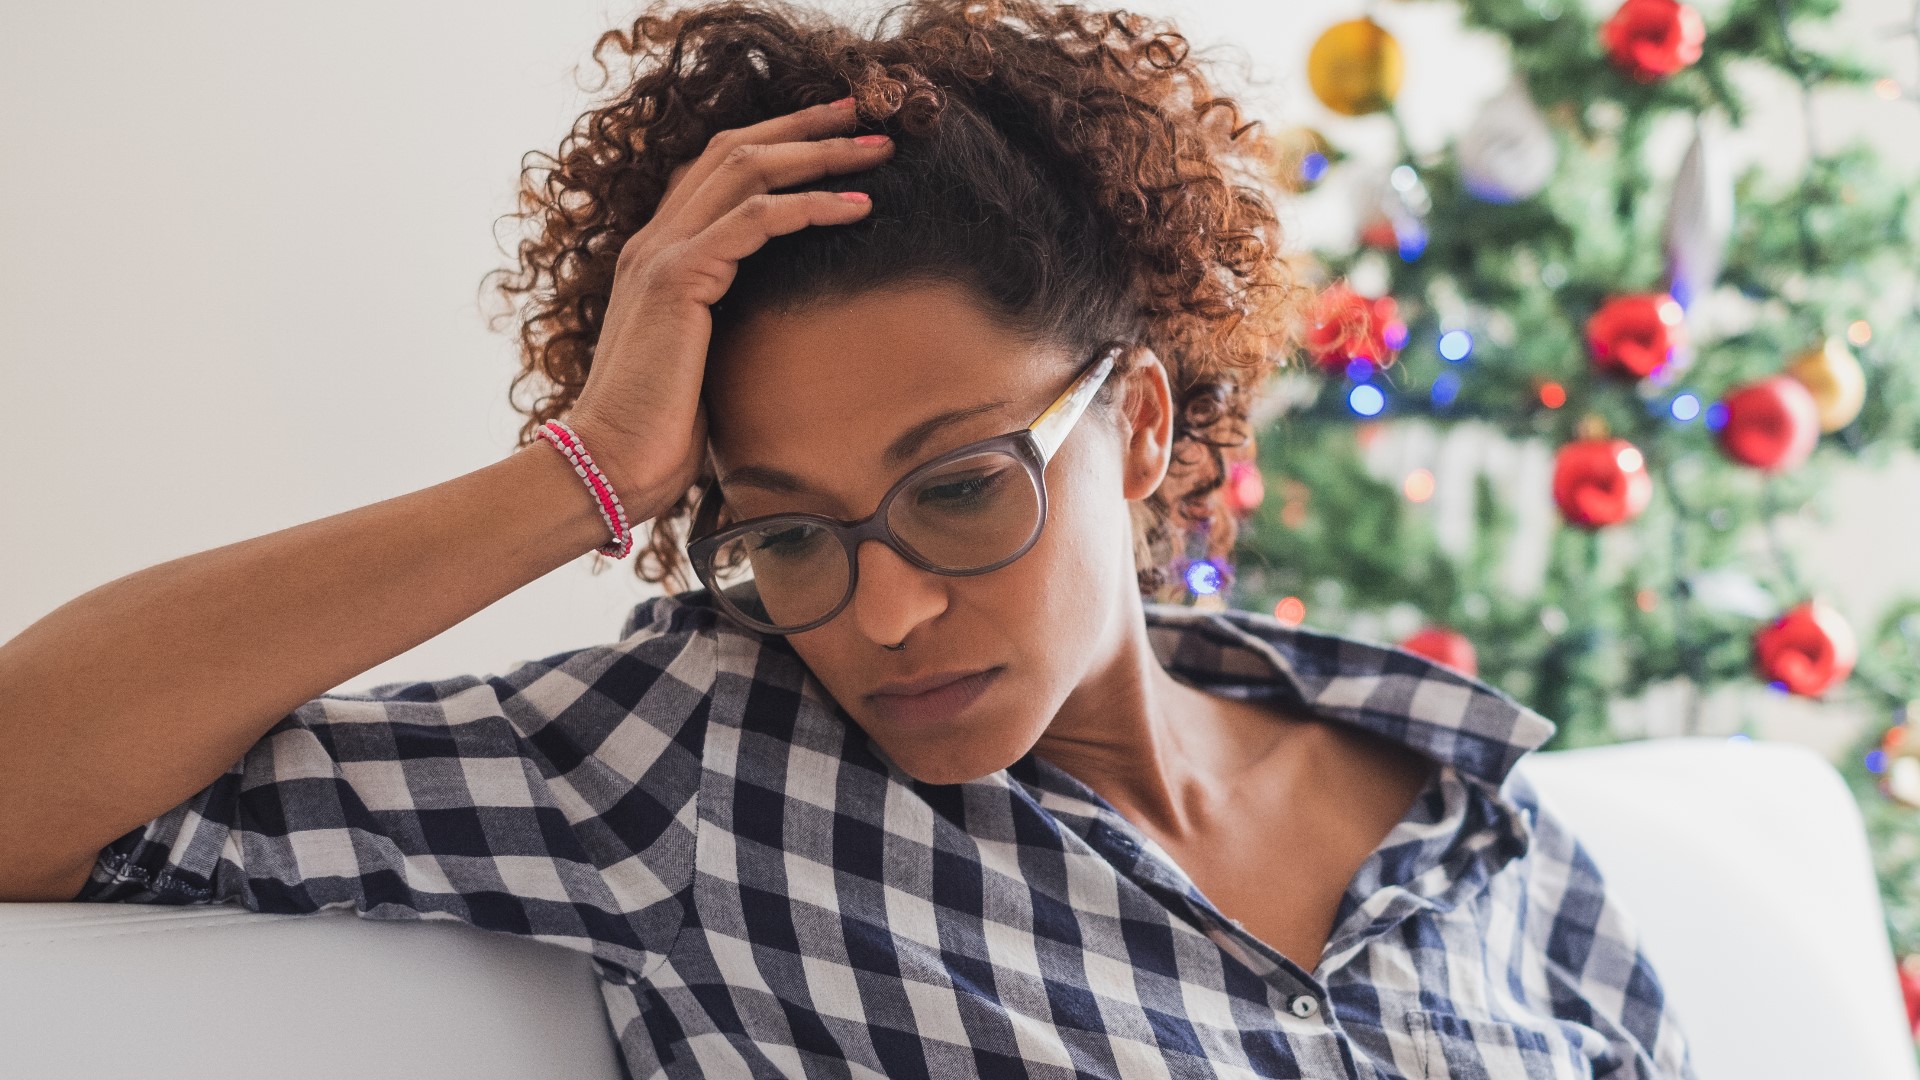 Morgan Hewett, Co-Founder of Options MD, shares helpful tips on how to manage depression during the holidays, if you or a loved one are experiencing symptoms.